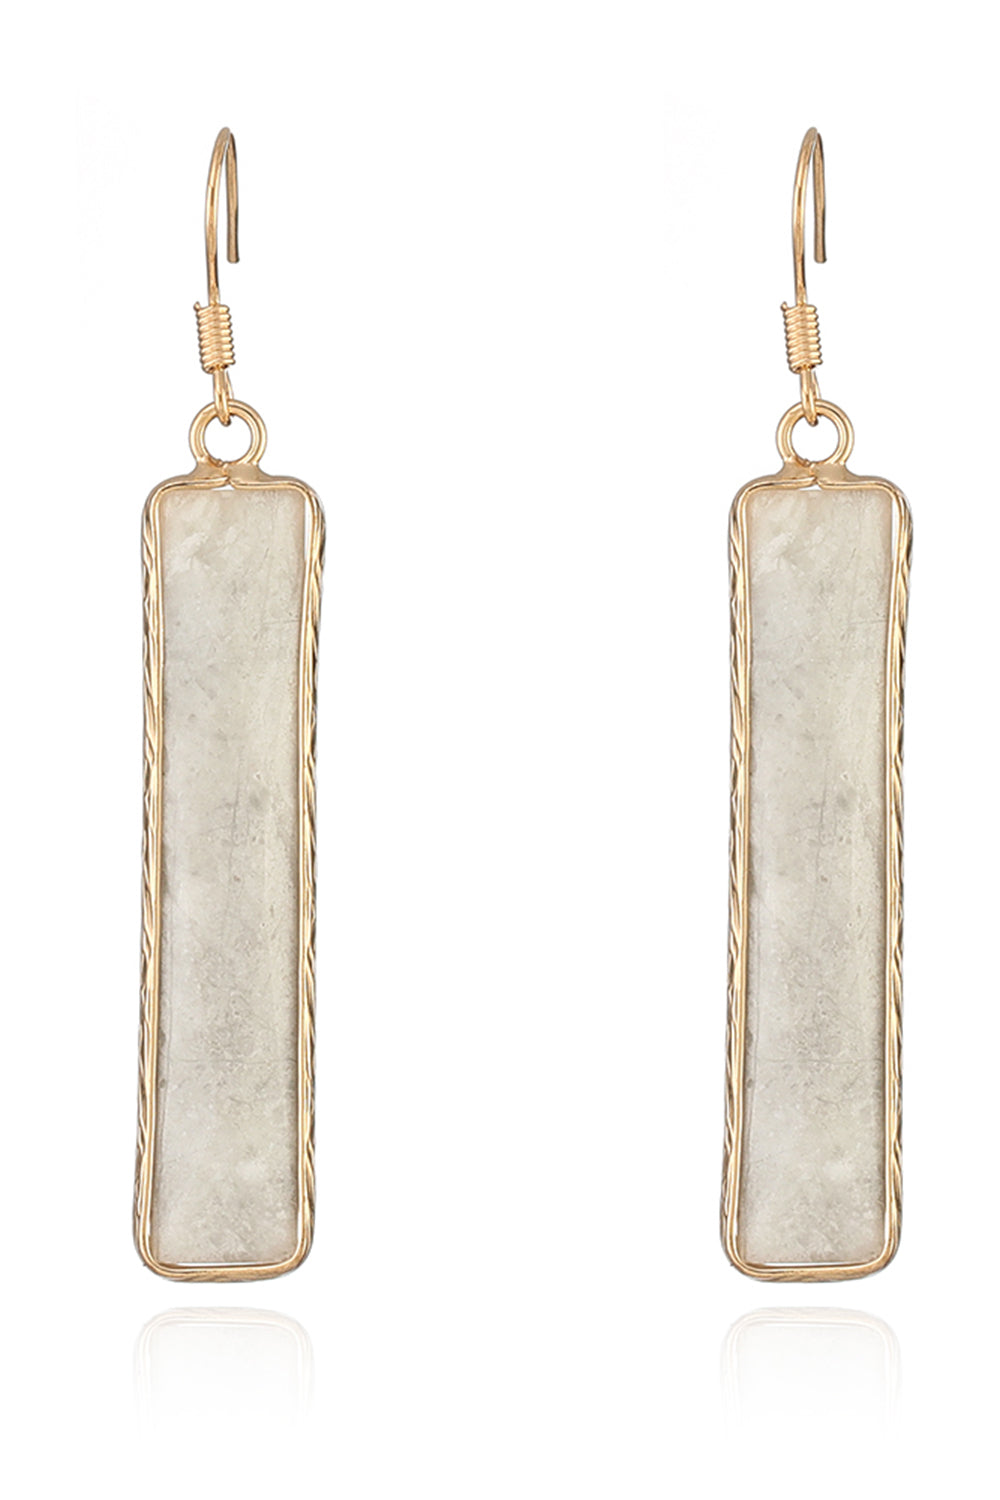 Light Gray Natural Stone Drop Earrings Sentient Beauty Fashions jewelry